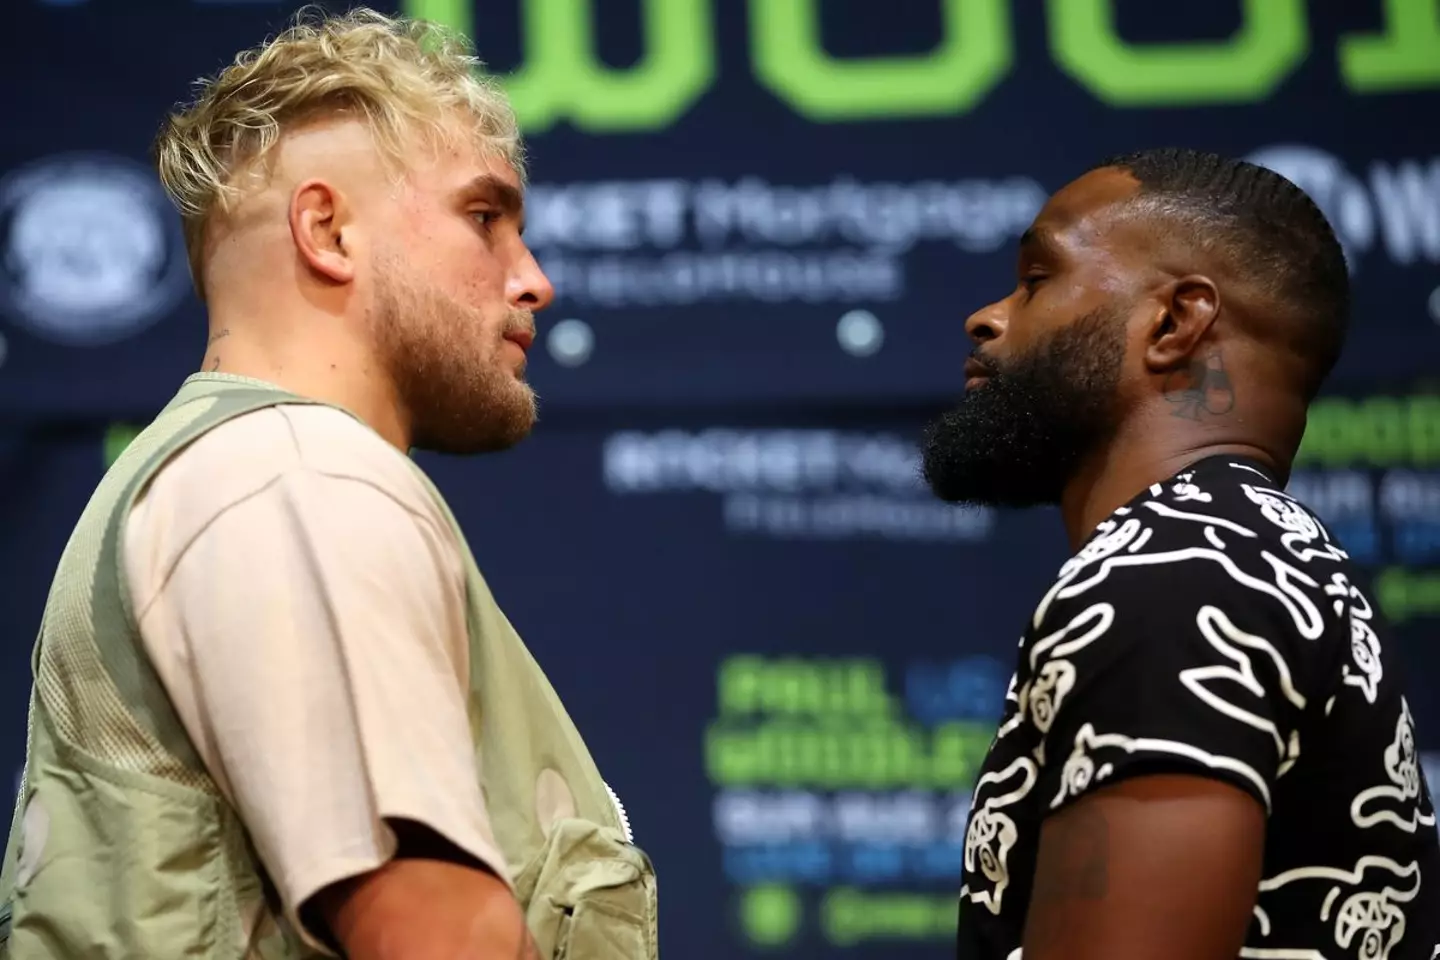 Jake Paul and Tyron Woodley are both set for multi-million dollar paydays